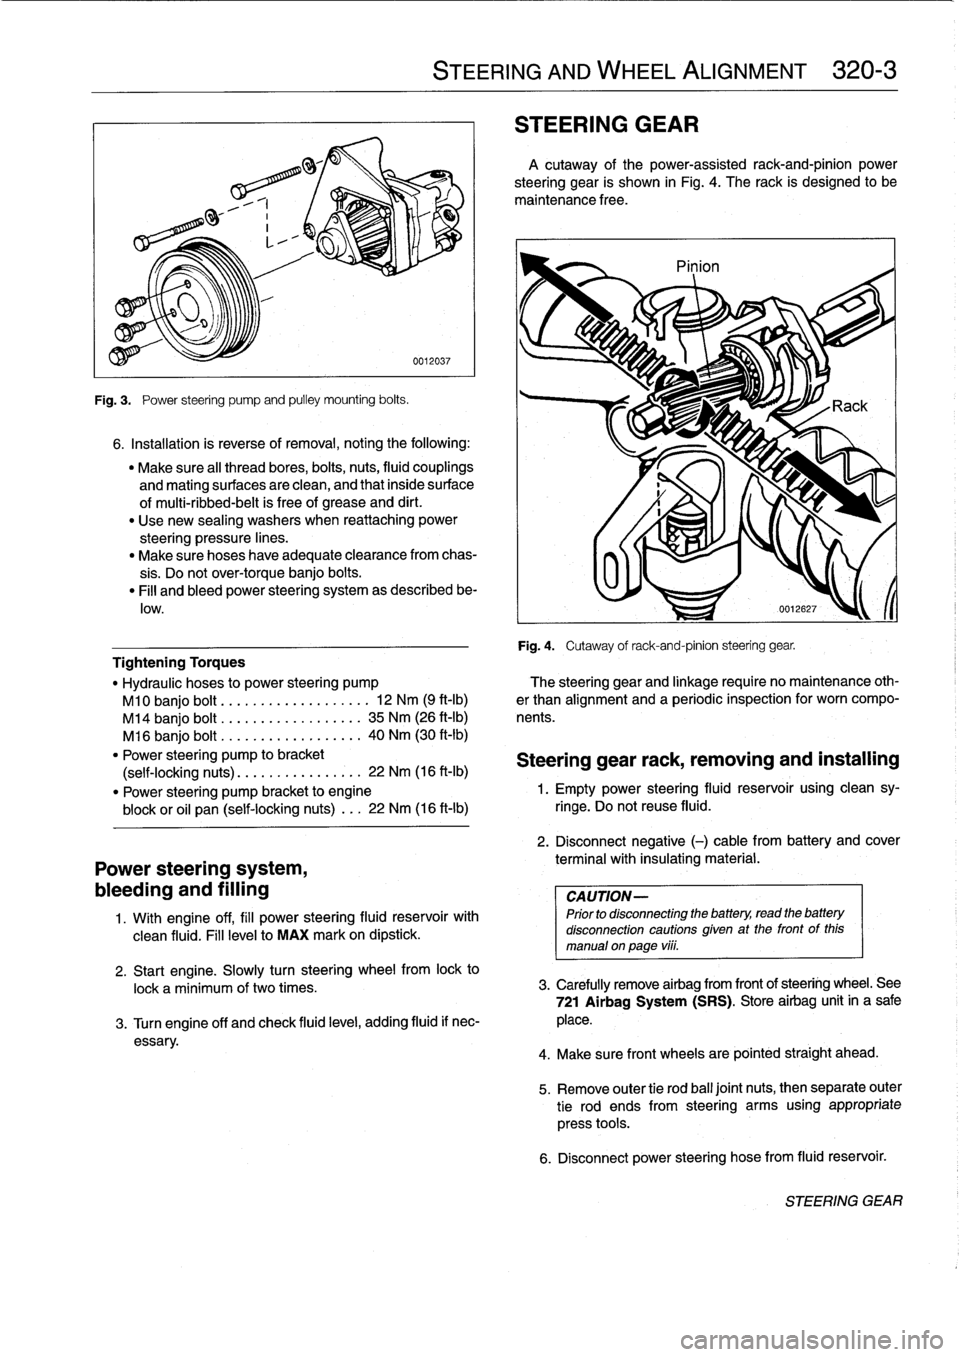 BMW 323i 1993 E36 Workshop Manual 
Fig
.
3
.

	

Power
steering
pump
and
pulley
mounting
bolts
.

6
.
Installation
is
reverse
of
removal,
noting
the
following
:

"
Make
sure
al¡
thread
bores,
bolts,
nuts,
fluid
couplings

and
mating
